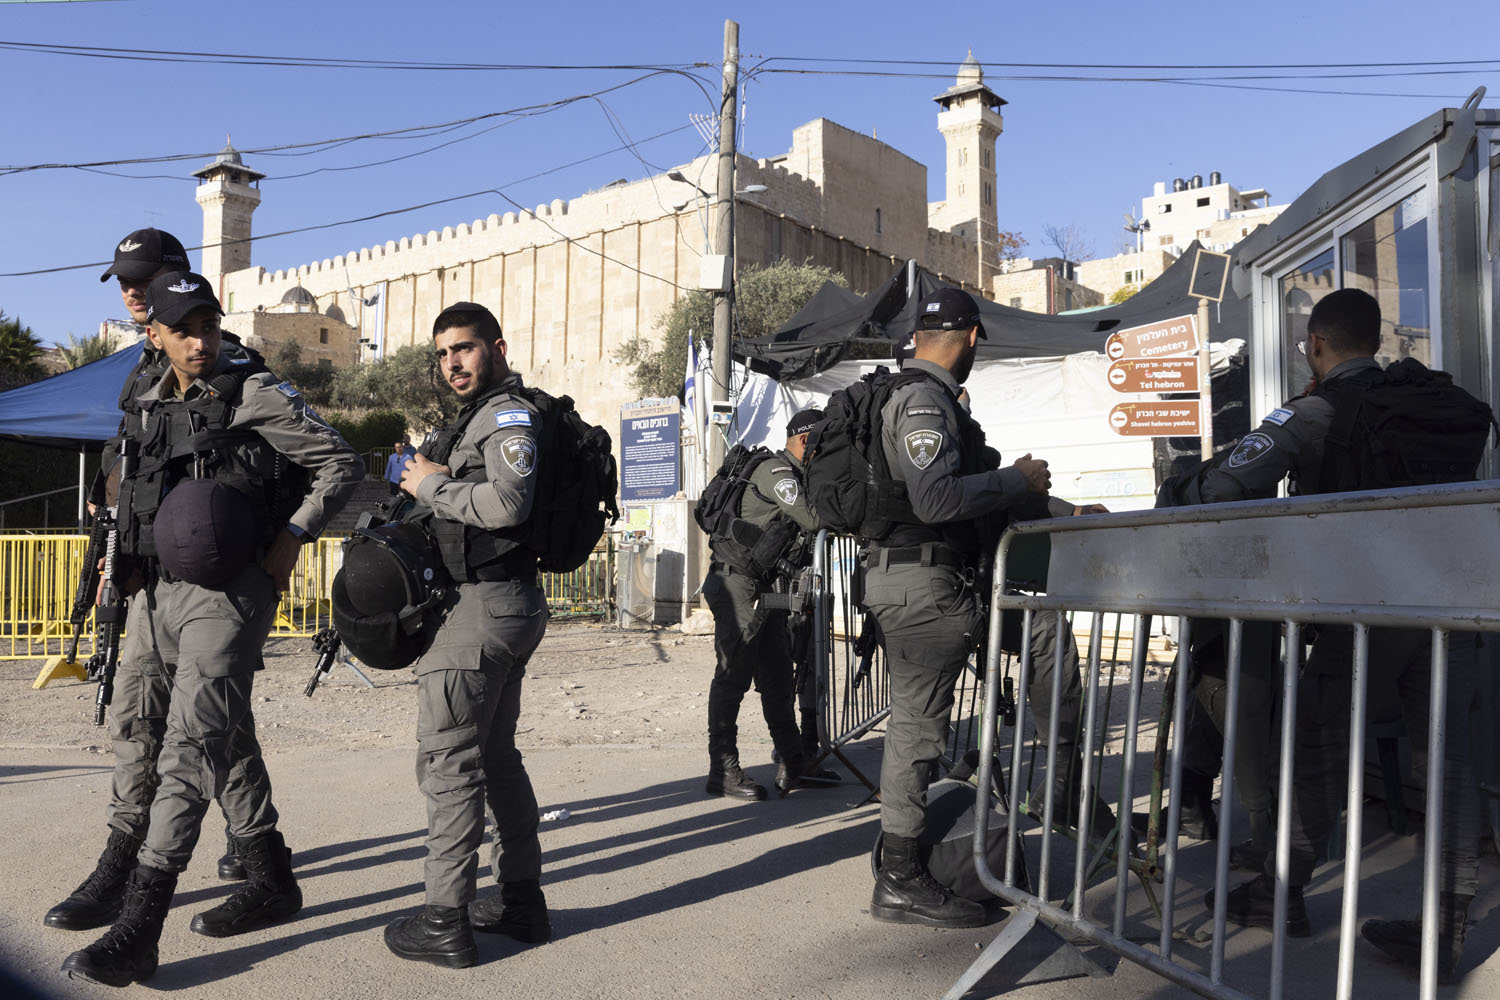 Israeli Border Police guarding in front of the Tomb of the Patriarchs/Ibrahimi Mosque in the Old City of Hebron, West Bank, Nov. 28, 2021. (Oren Ziv)